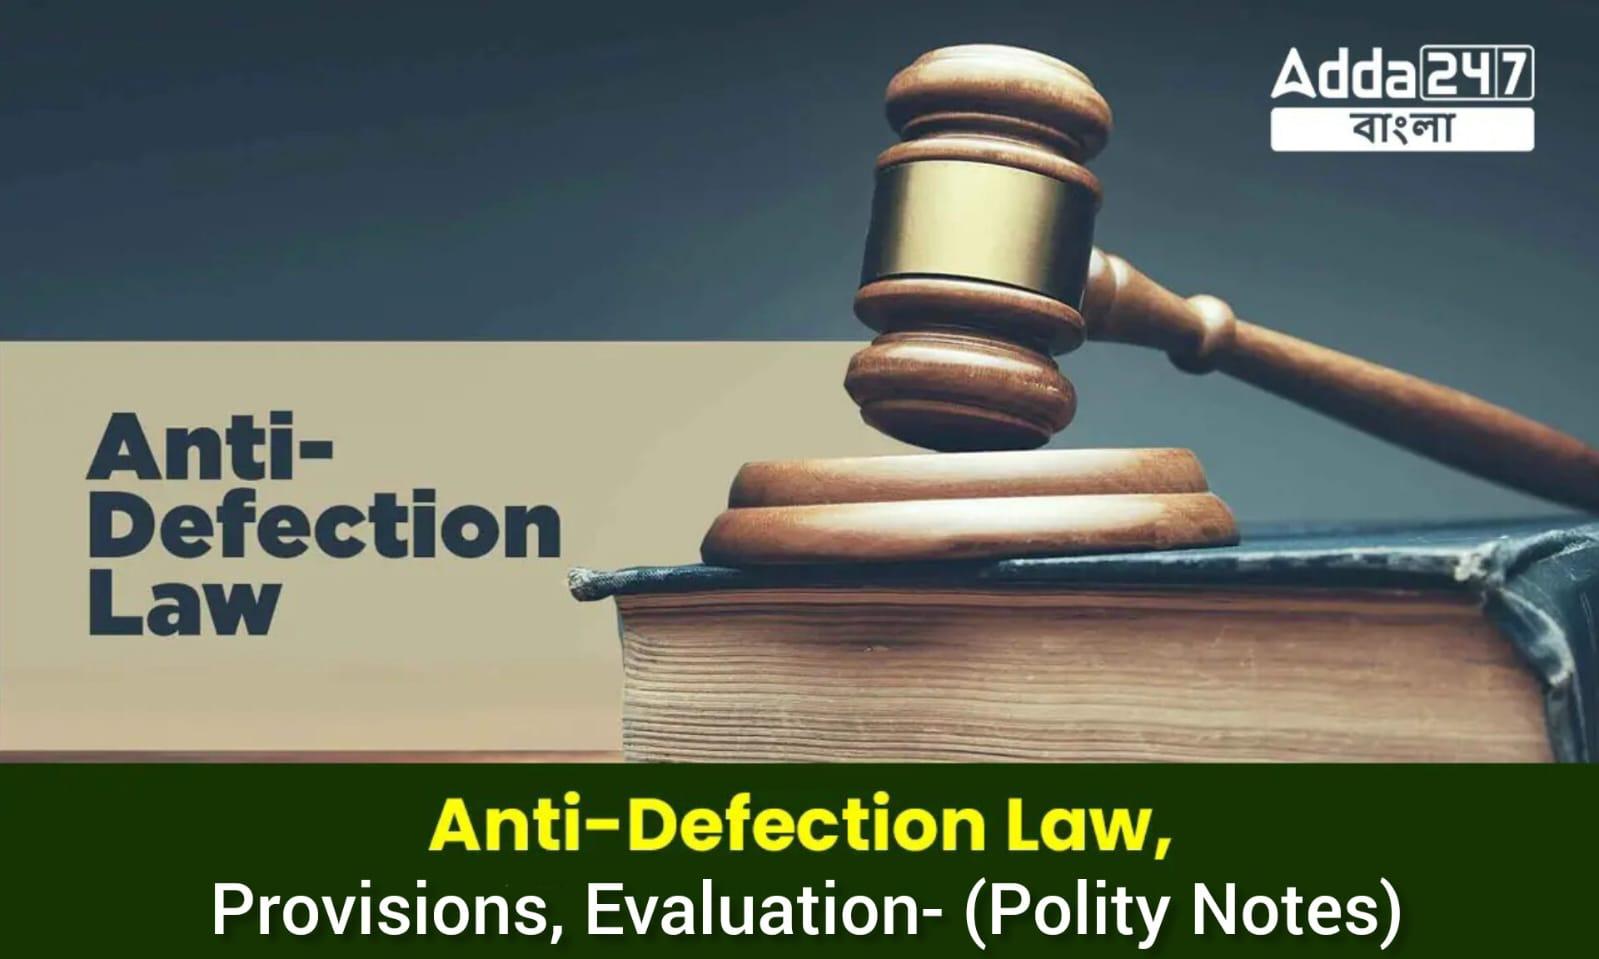 Anti-Defection Law, Provisions, Evaluation- (Polity Notes)